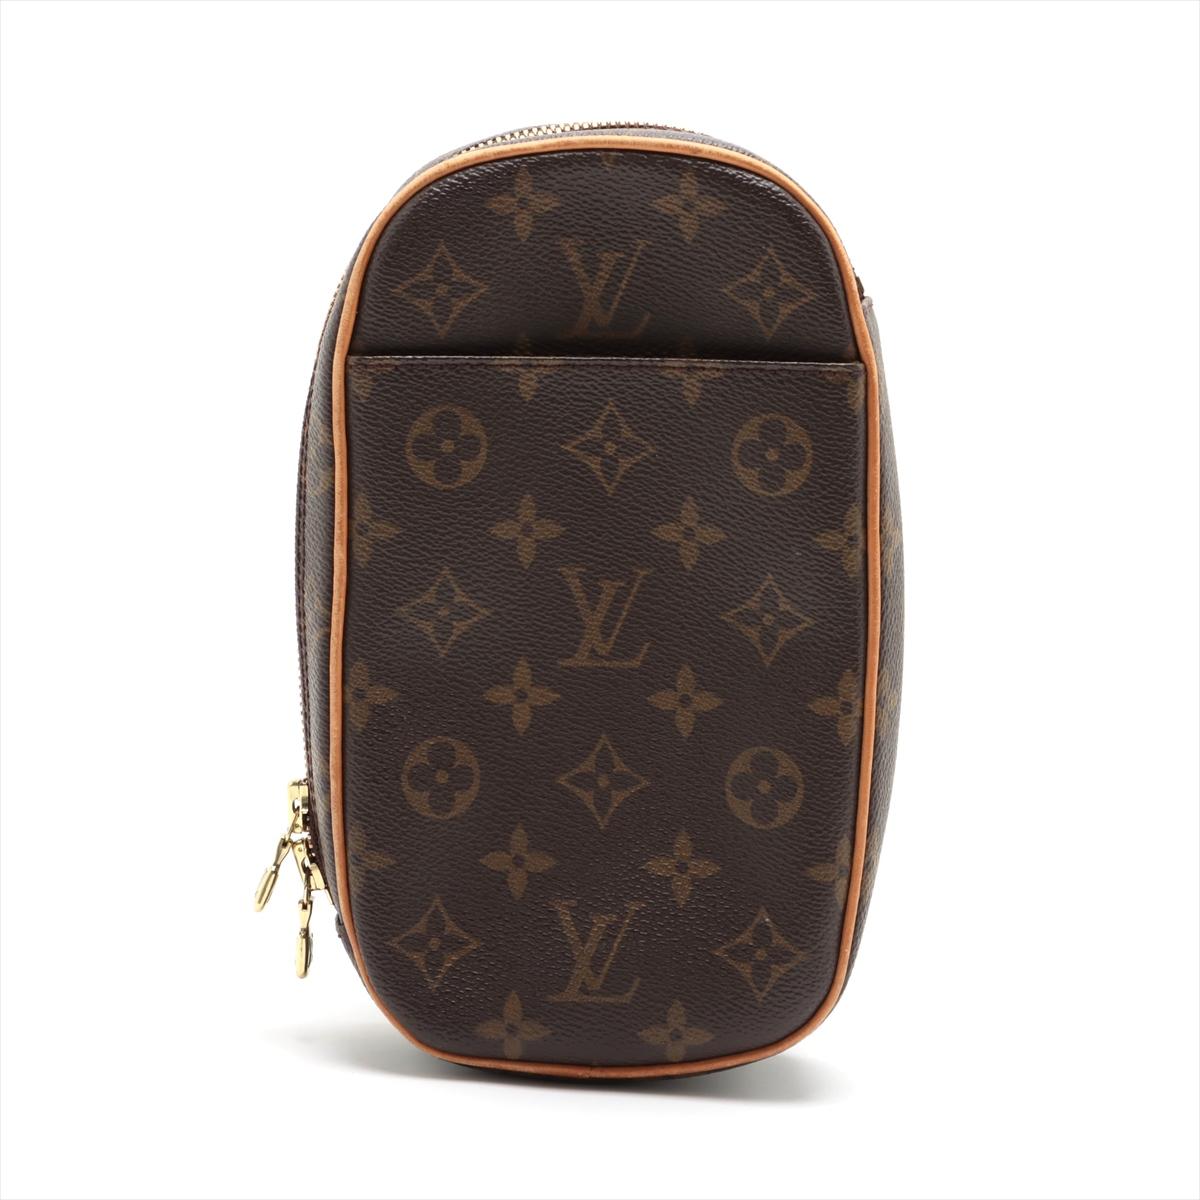 The Louis Vuitton Monogram Pochette Gange is a stylish and practical accessory designed for those on the go. Crafted from the iconic Monogram canvas, the bag showcases the signature Louis Vuitton pattern, instantly recognizable and synonymous with